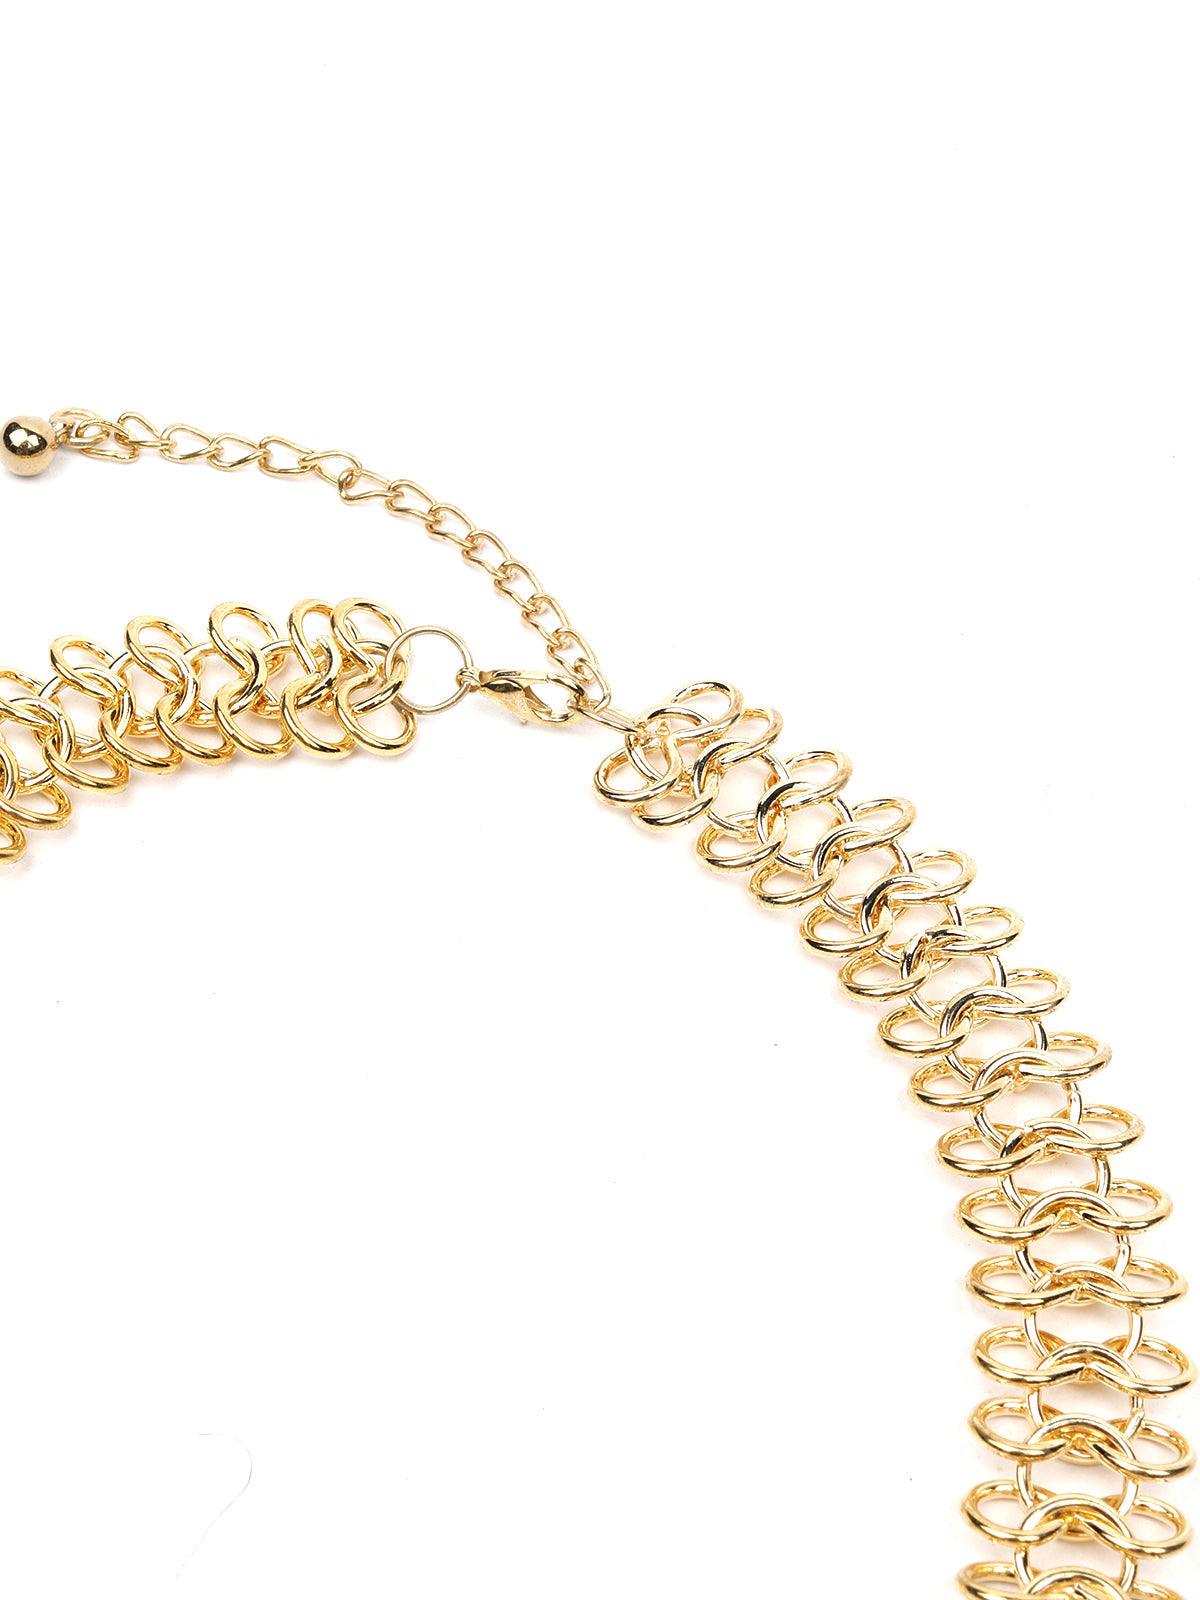 Women's Vibrant Yellow Stunning Necklace - Odette